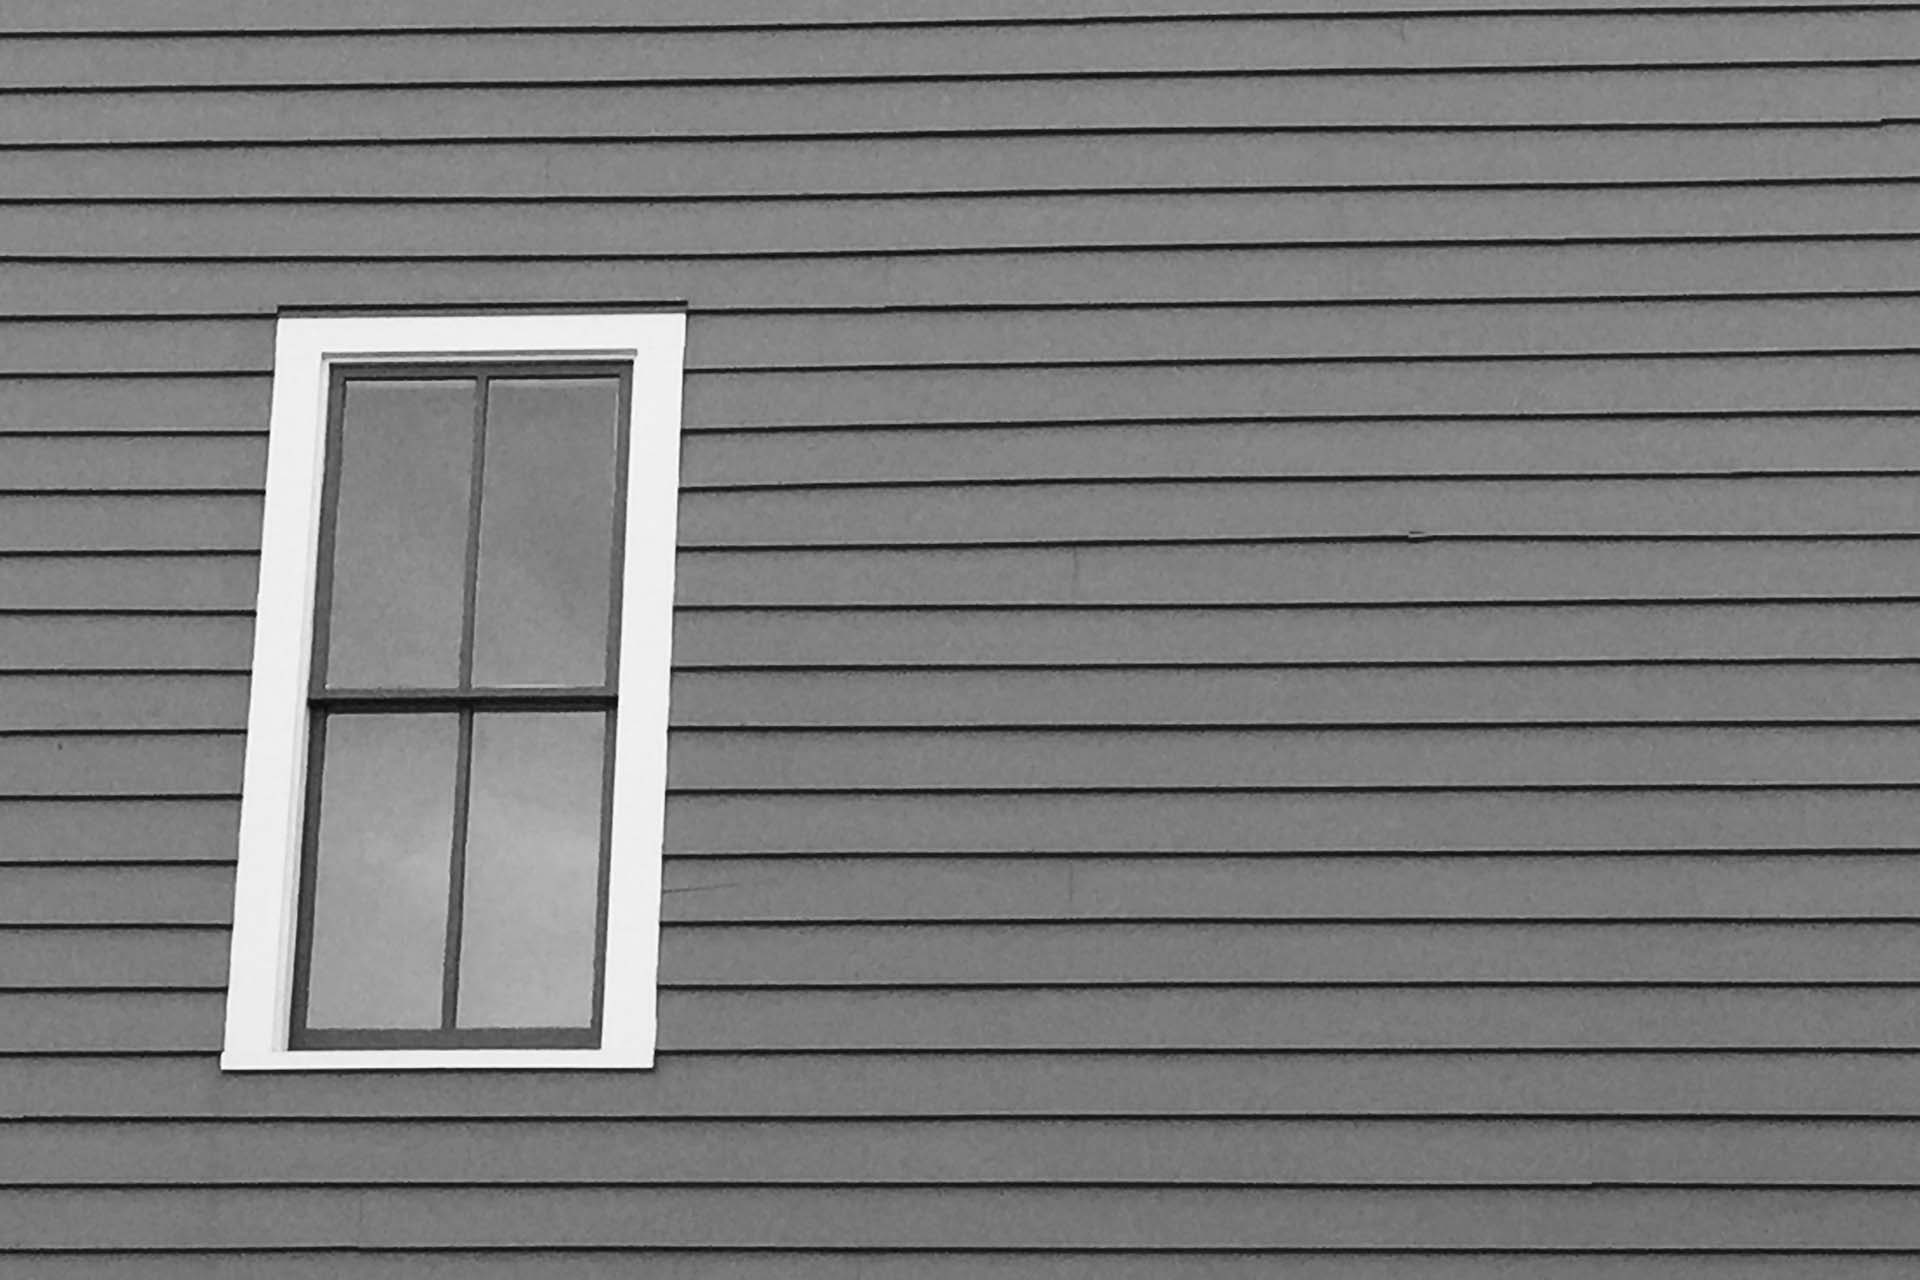 What Causes Holes in Vinyl Siding?